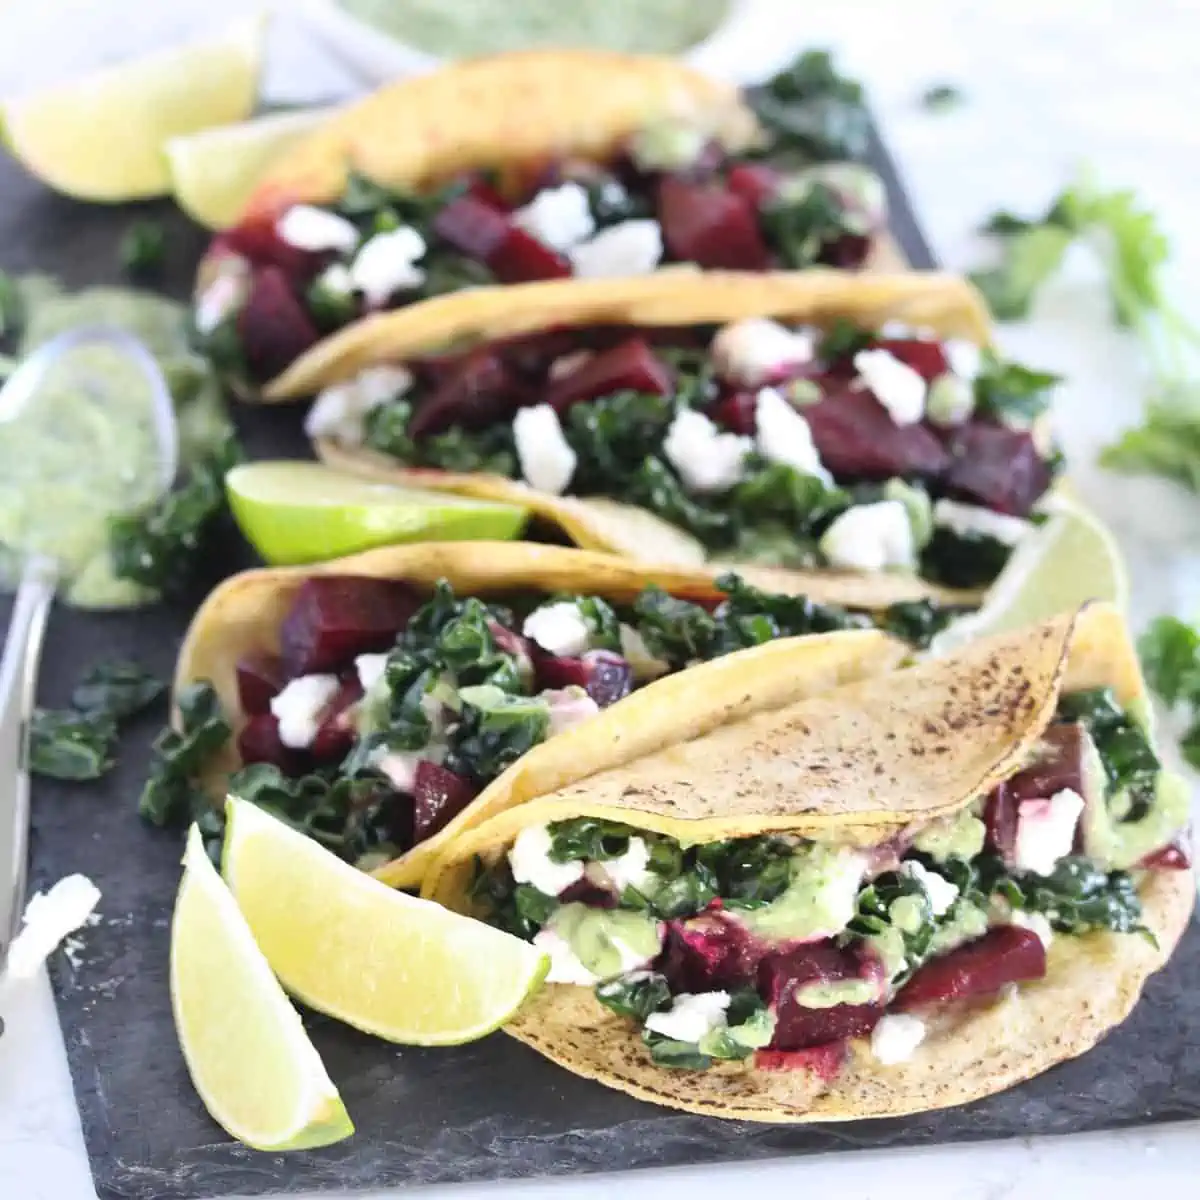 Beet and Kale Tacos with Avocado Sauce